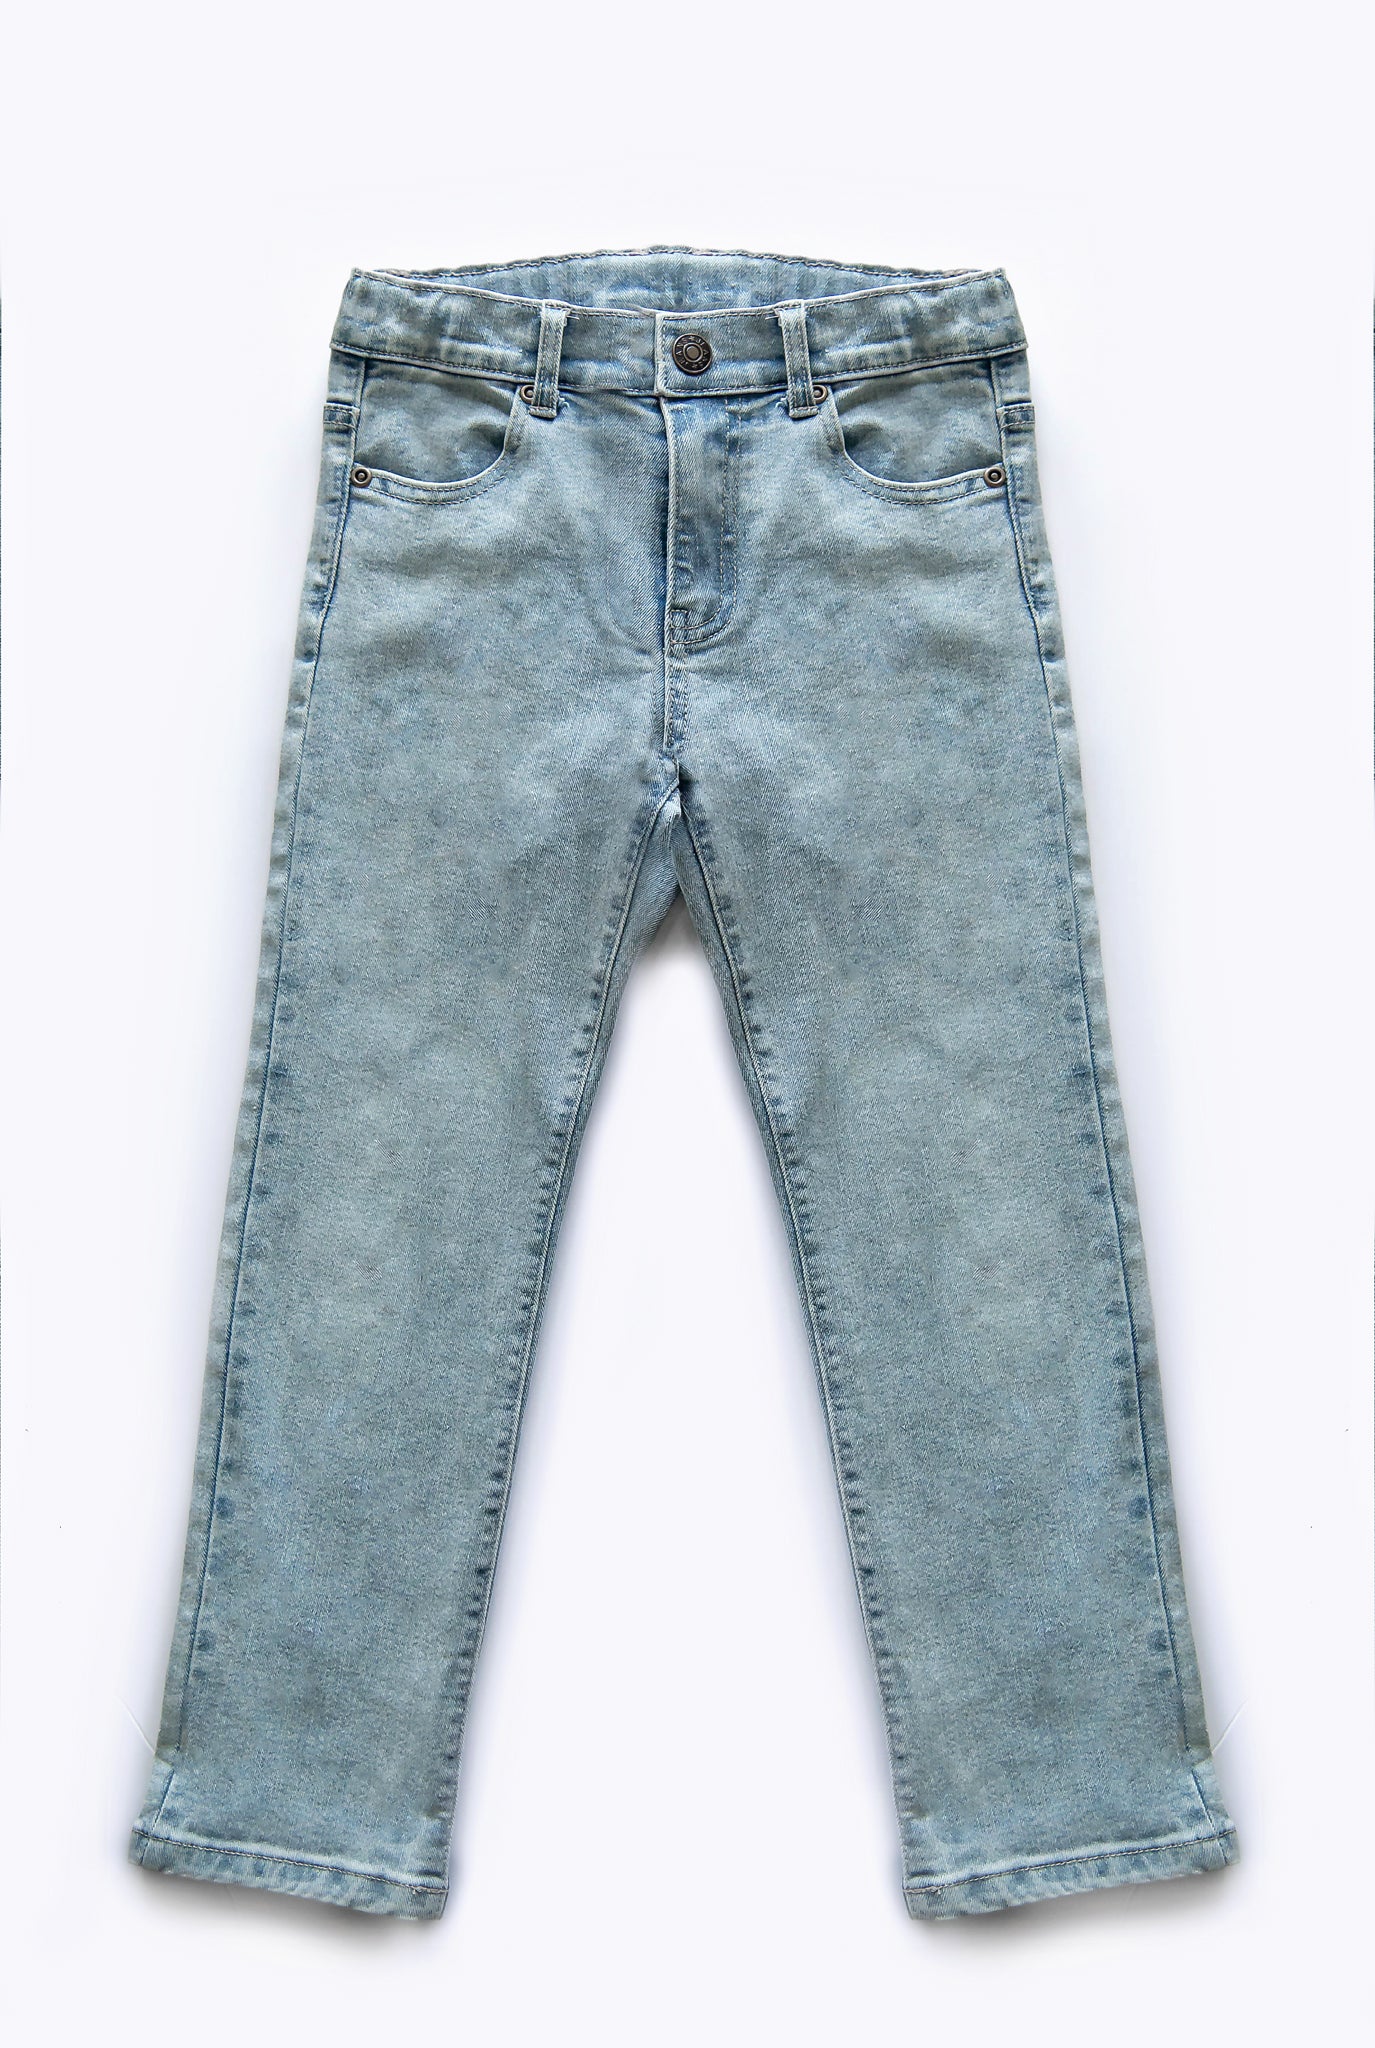 THEODORE JEANS LIGHT WASH